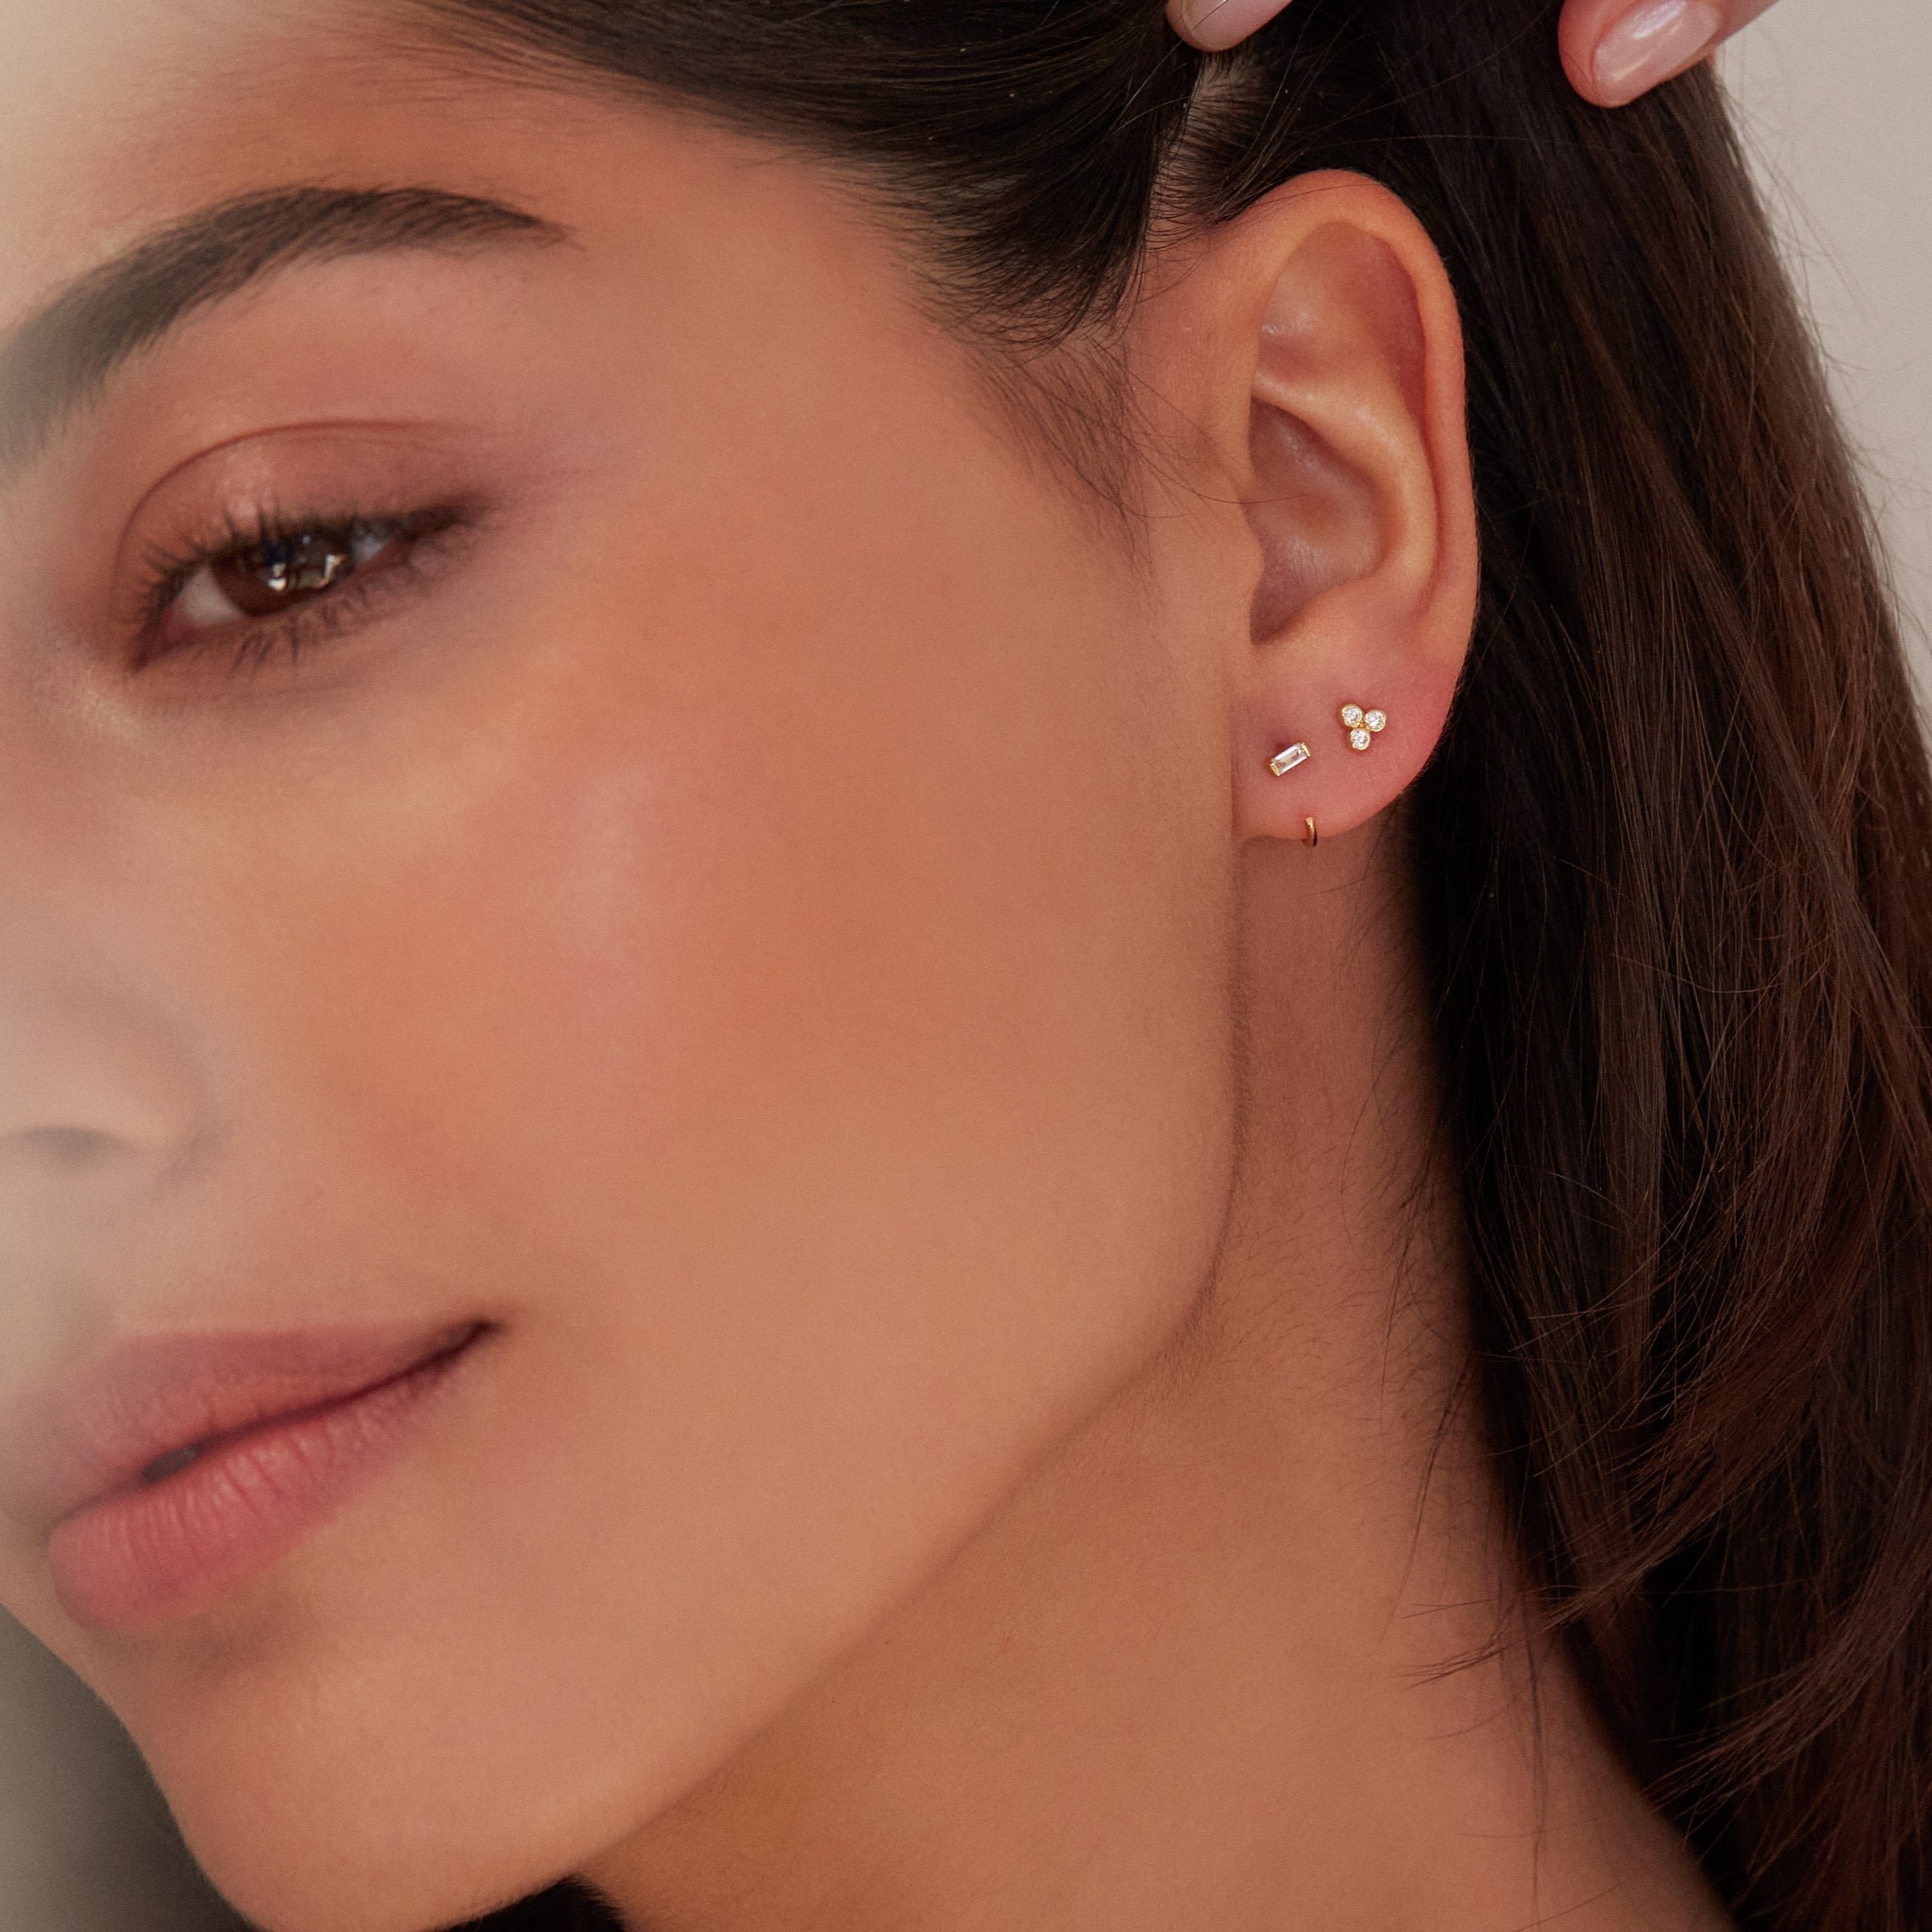 A gold diamond style pyramid stud earring and a gold diamond style lobe hoop stud earring in an ear lobe of a brunette woman